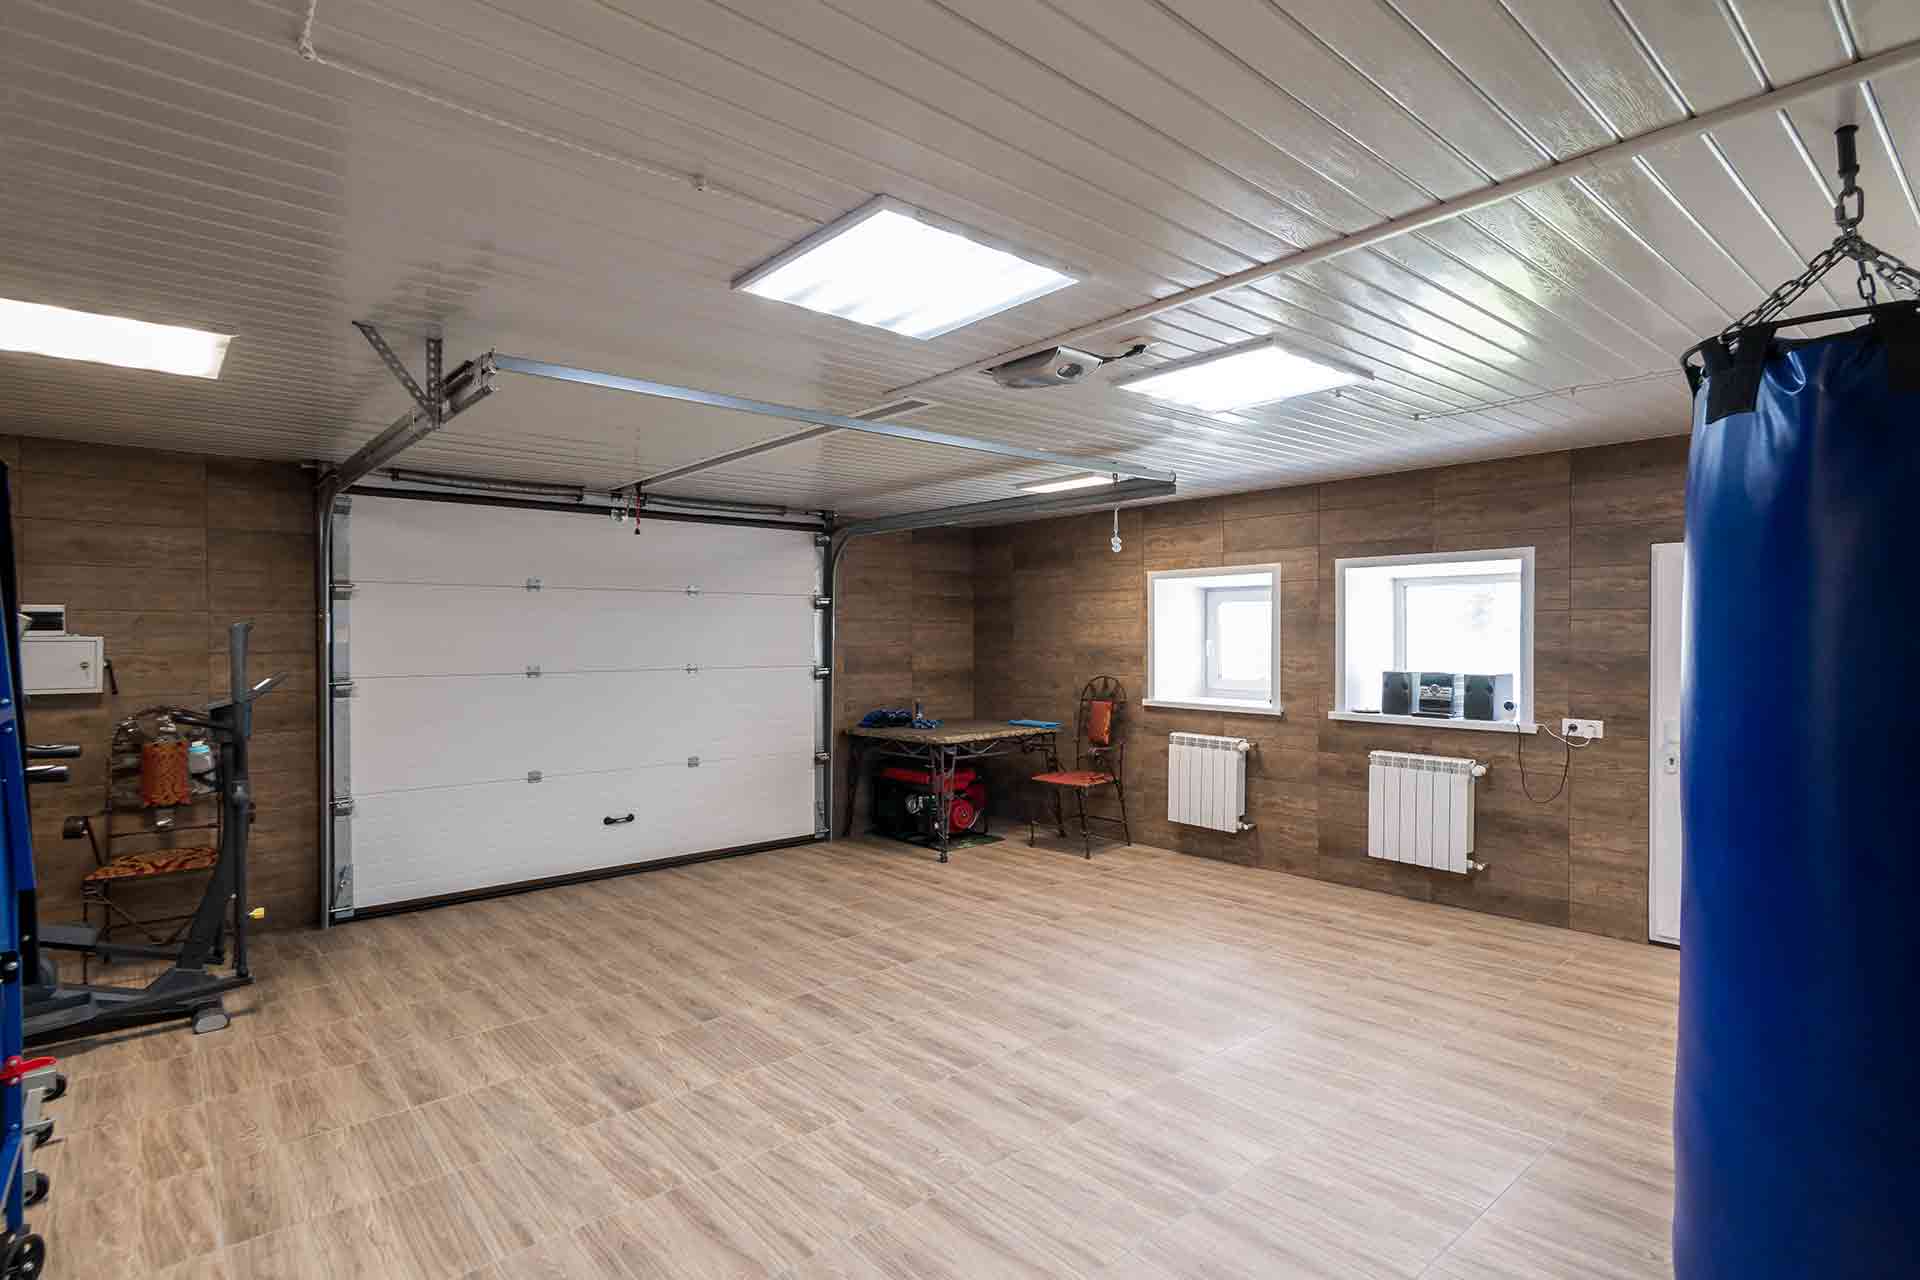 What Is the Price of Building a Garage?